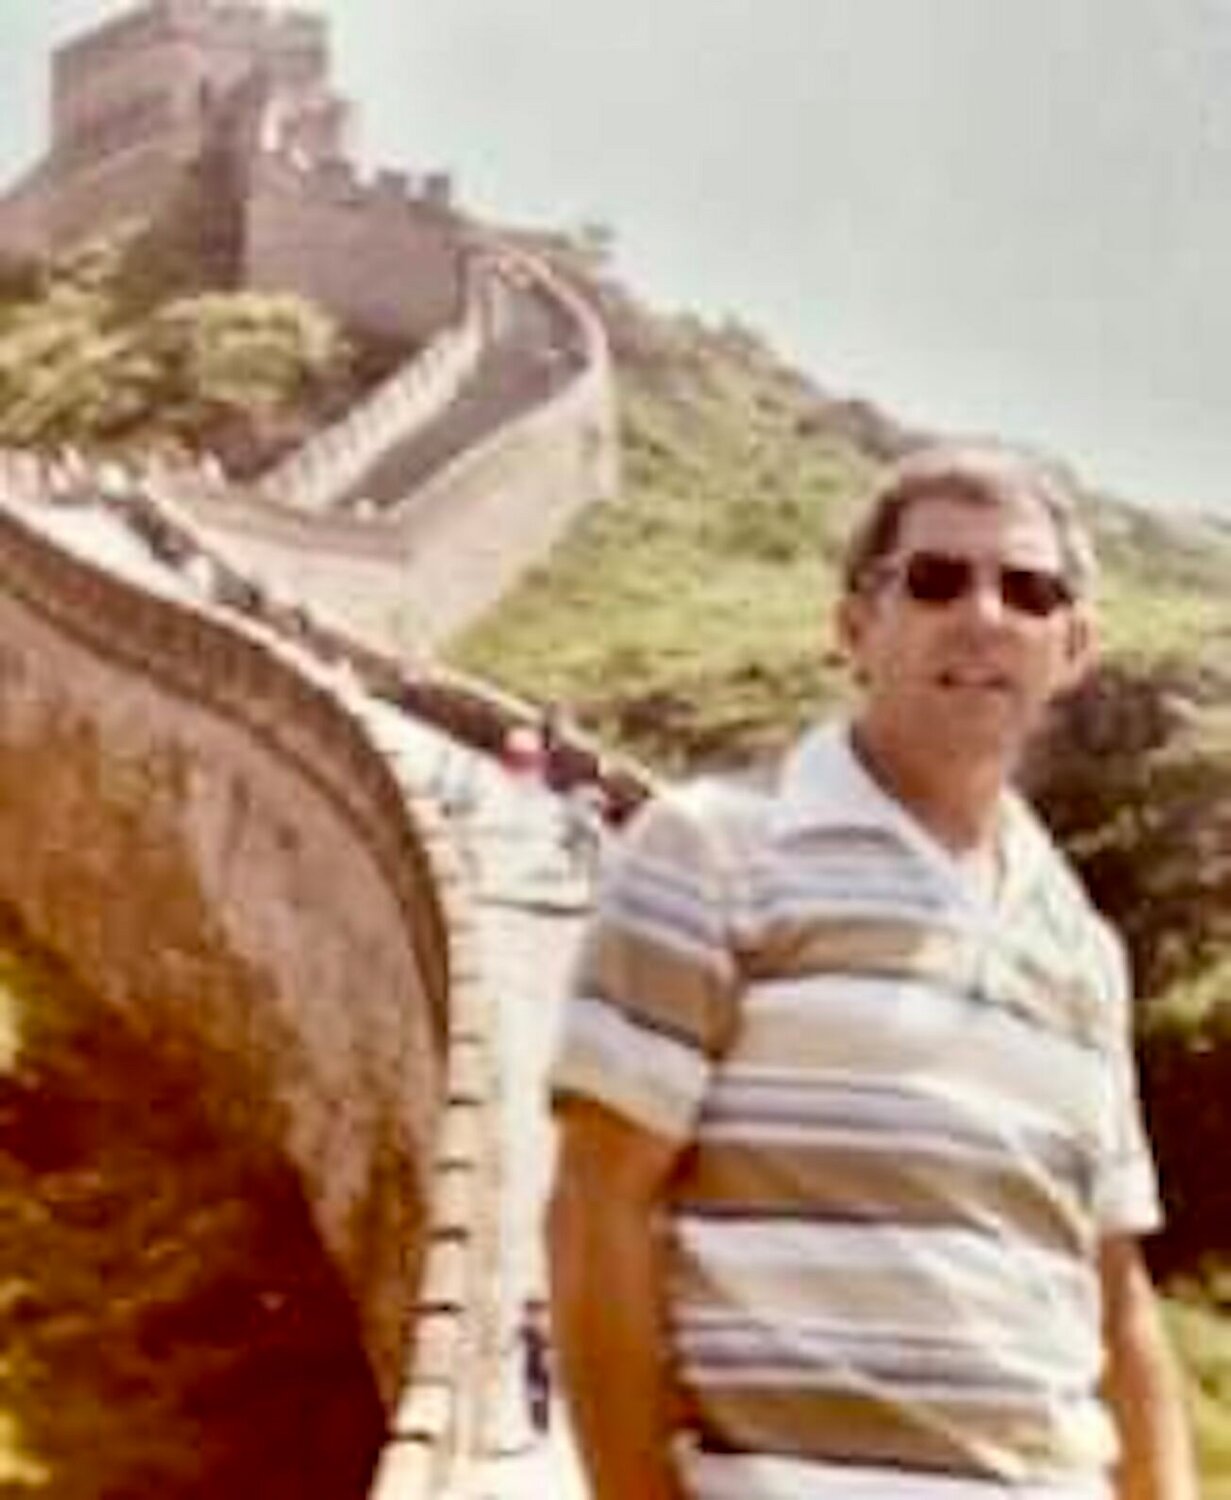 Bill standing on The Great Wall of China.